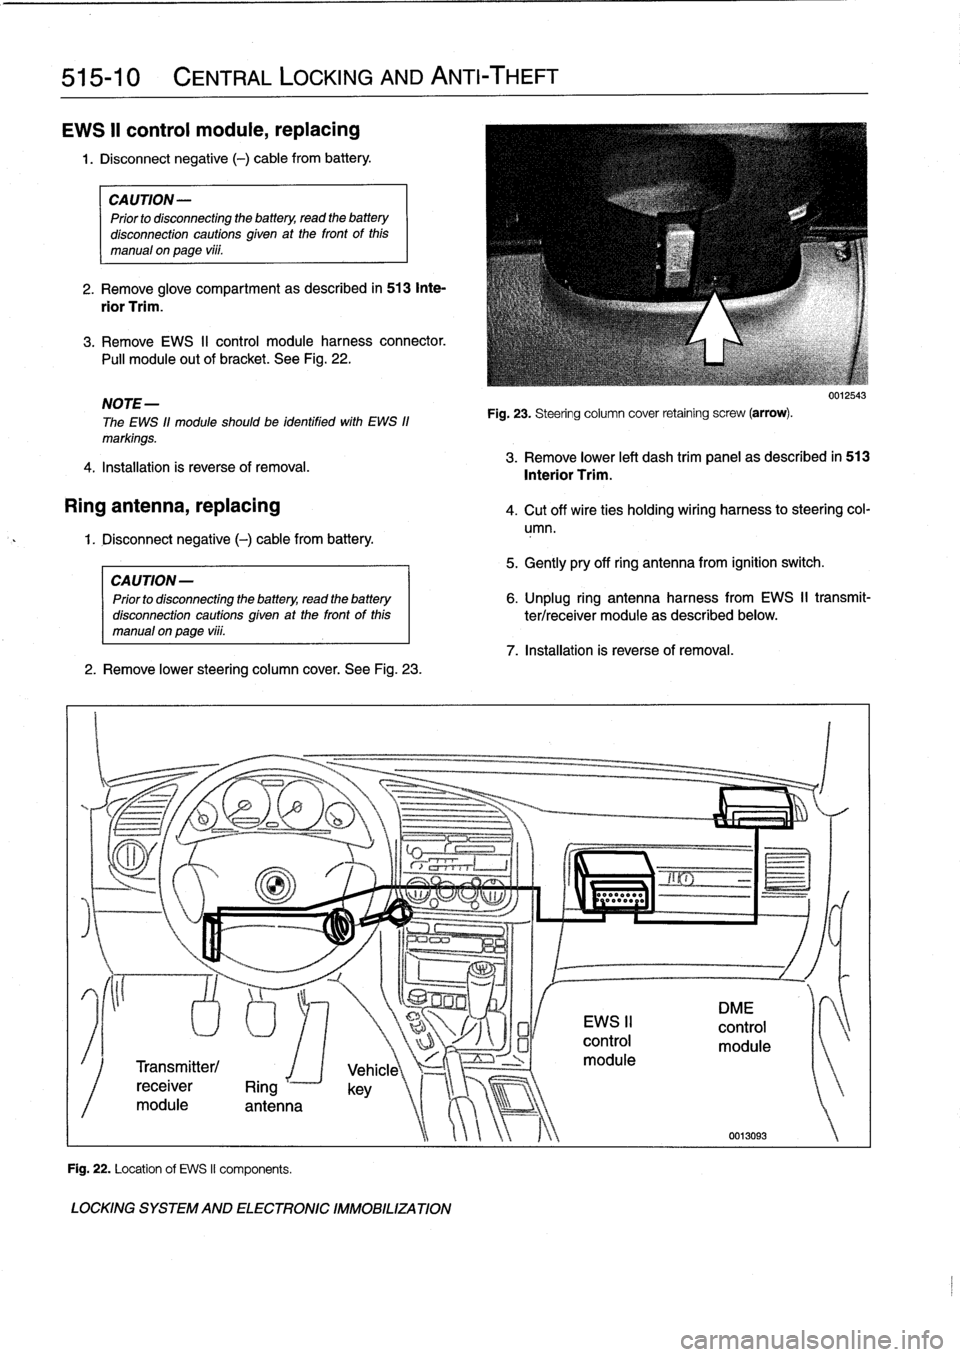 BMW M3 1993 E36 User Guide 
515-10

	

CENTRAL
LOCKING
AND
ANTI-THEFT

EWS
II
control
module,
replacing

1
.
Disconnect
negative
(-)
cable
from
battery
.

CAUTION-

Prior
to
disconnecting
the
battery,
read
the
battery

disconne